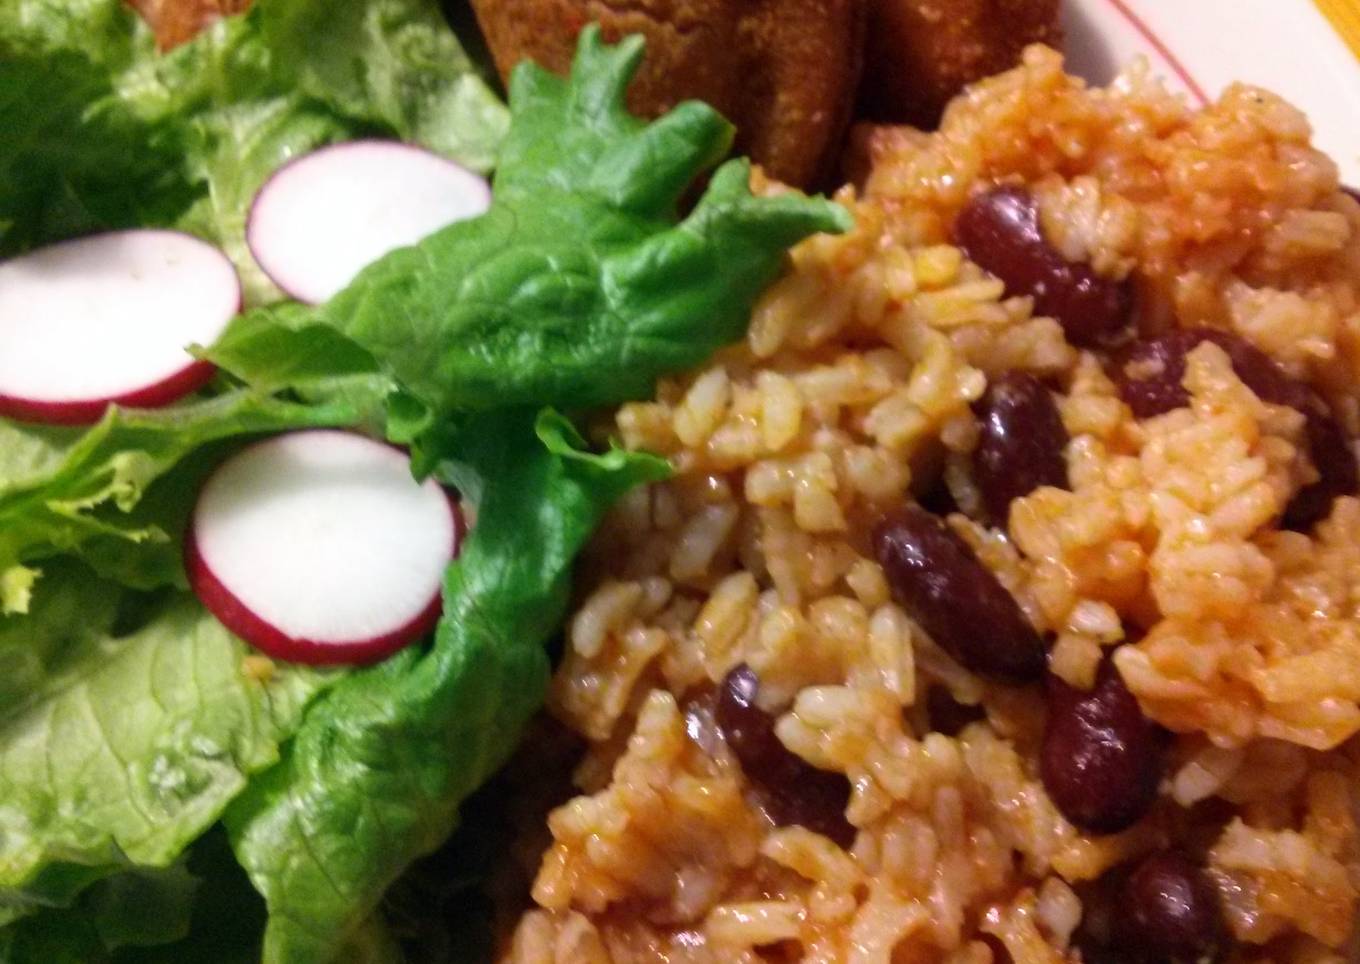 sandra's simple rice with beans